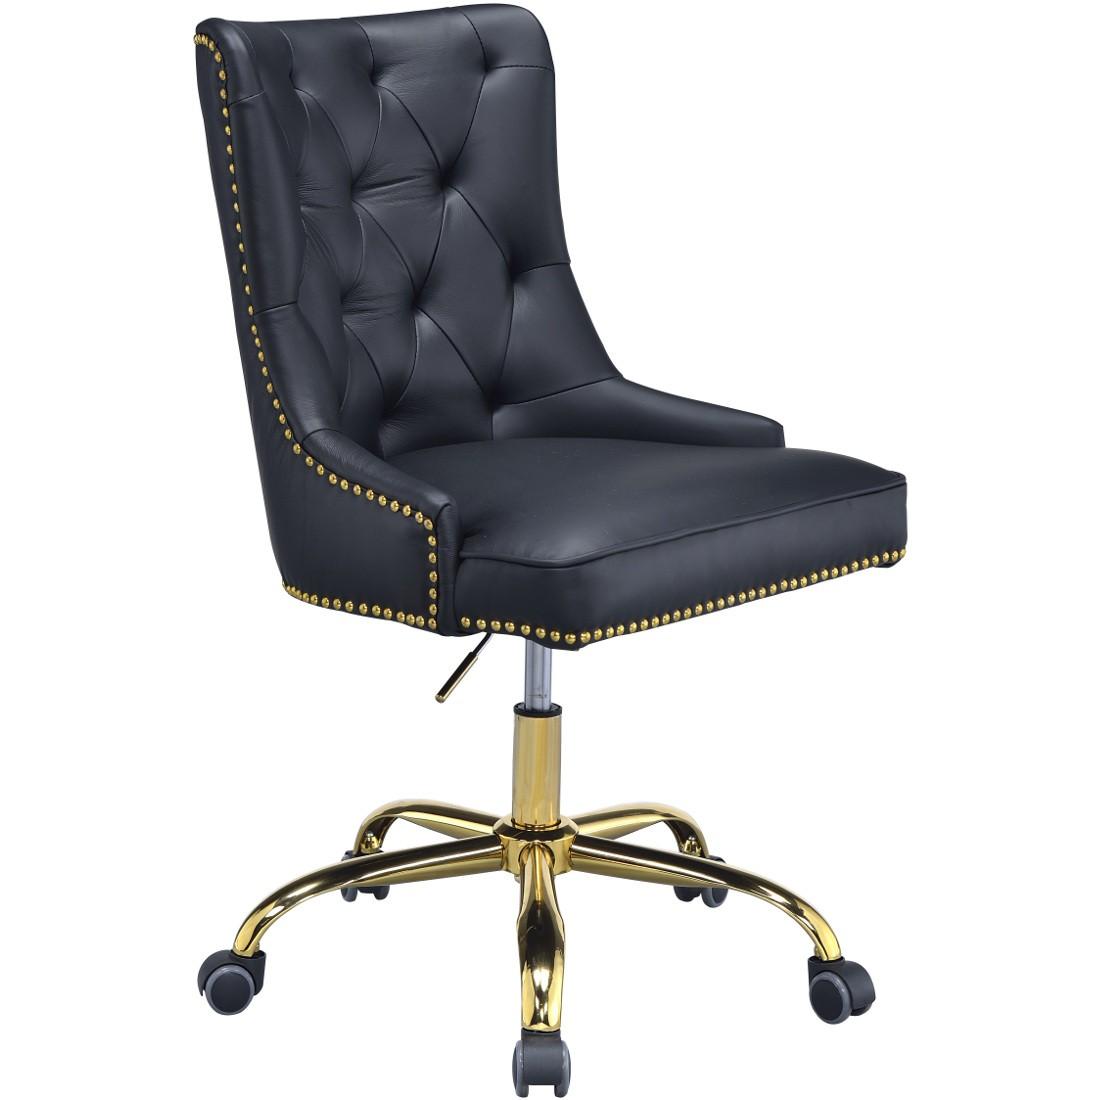 Contemporary, Transitional Office Chair Purlie Purlie 92518 in Chrome, Black PU